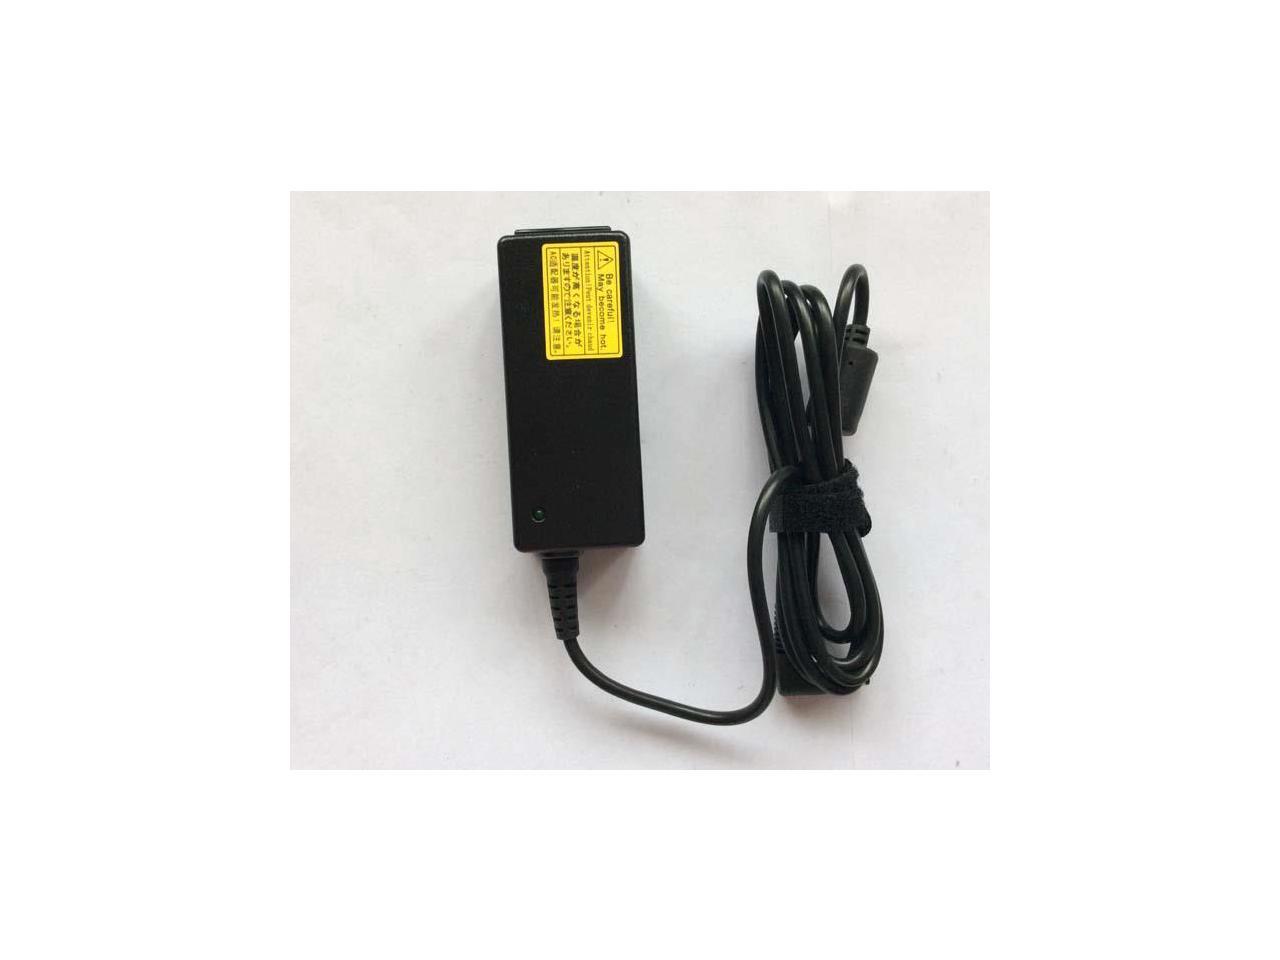 12v 3a Laptop Ac Adapter Power Adapter For Asus Eee Pc 1002 1002h 1002ha Adp 36ehc R Adp 36eh C R Newegg Com